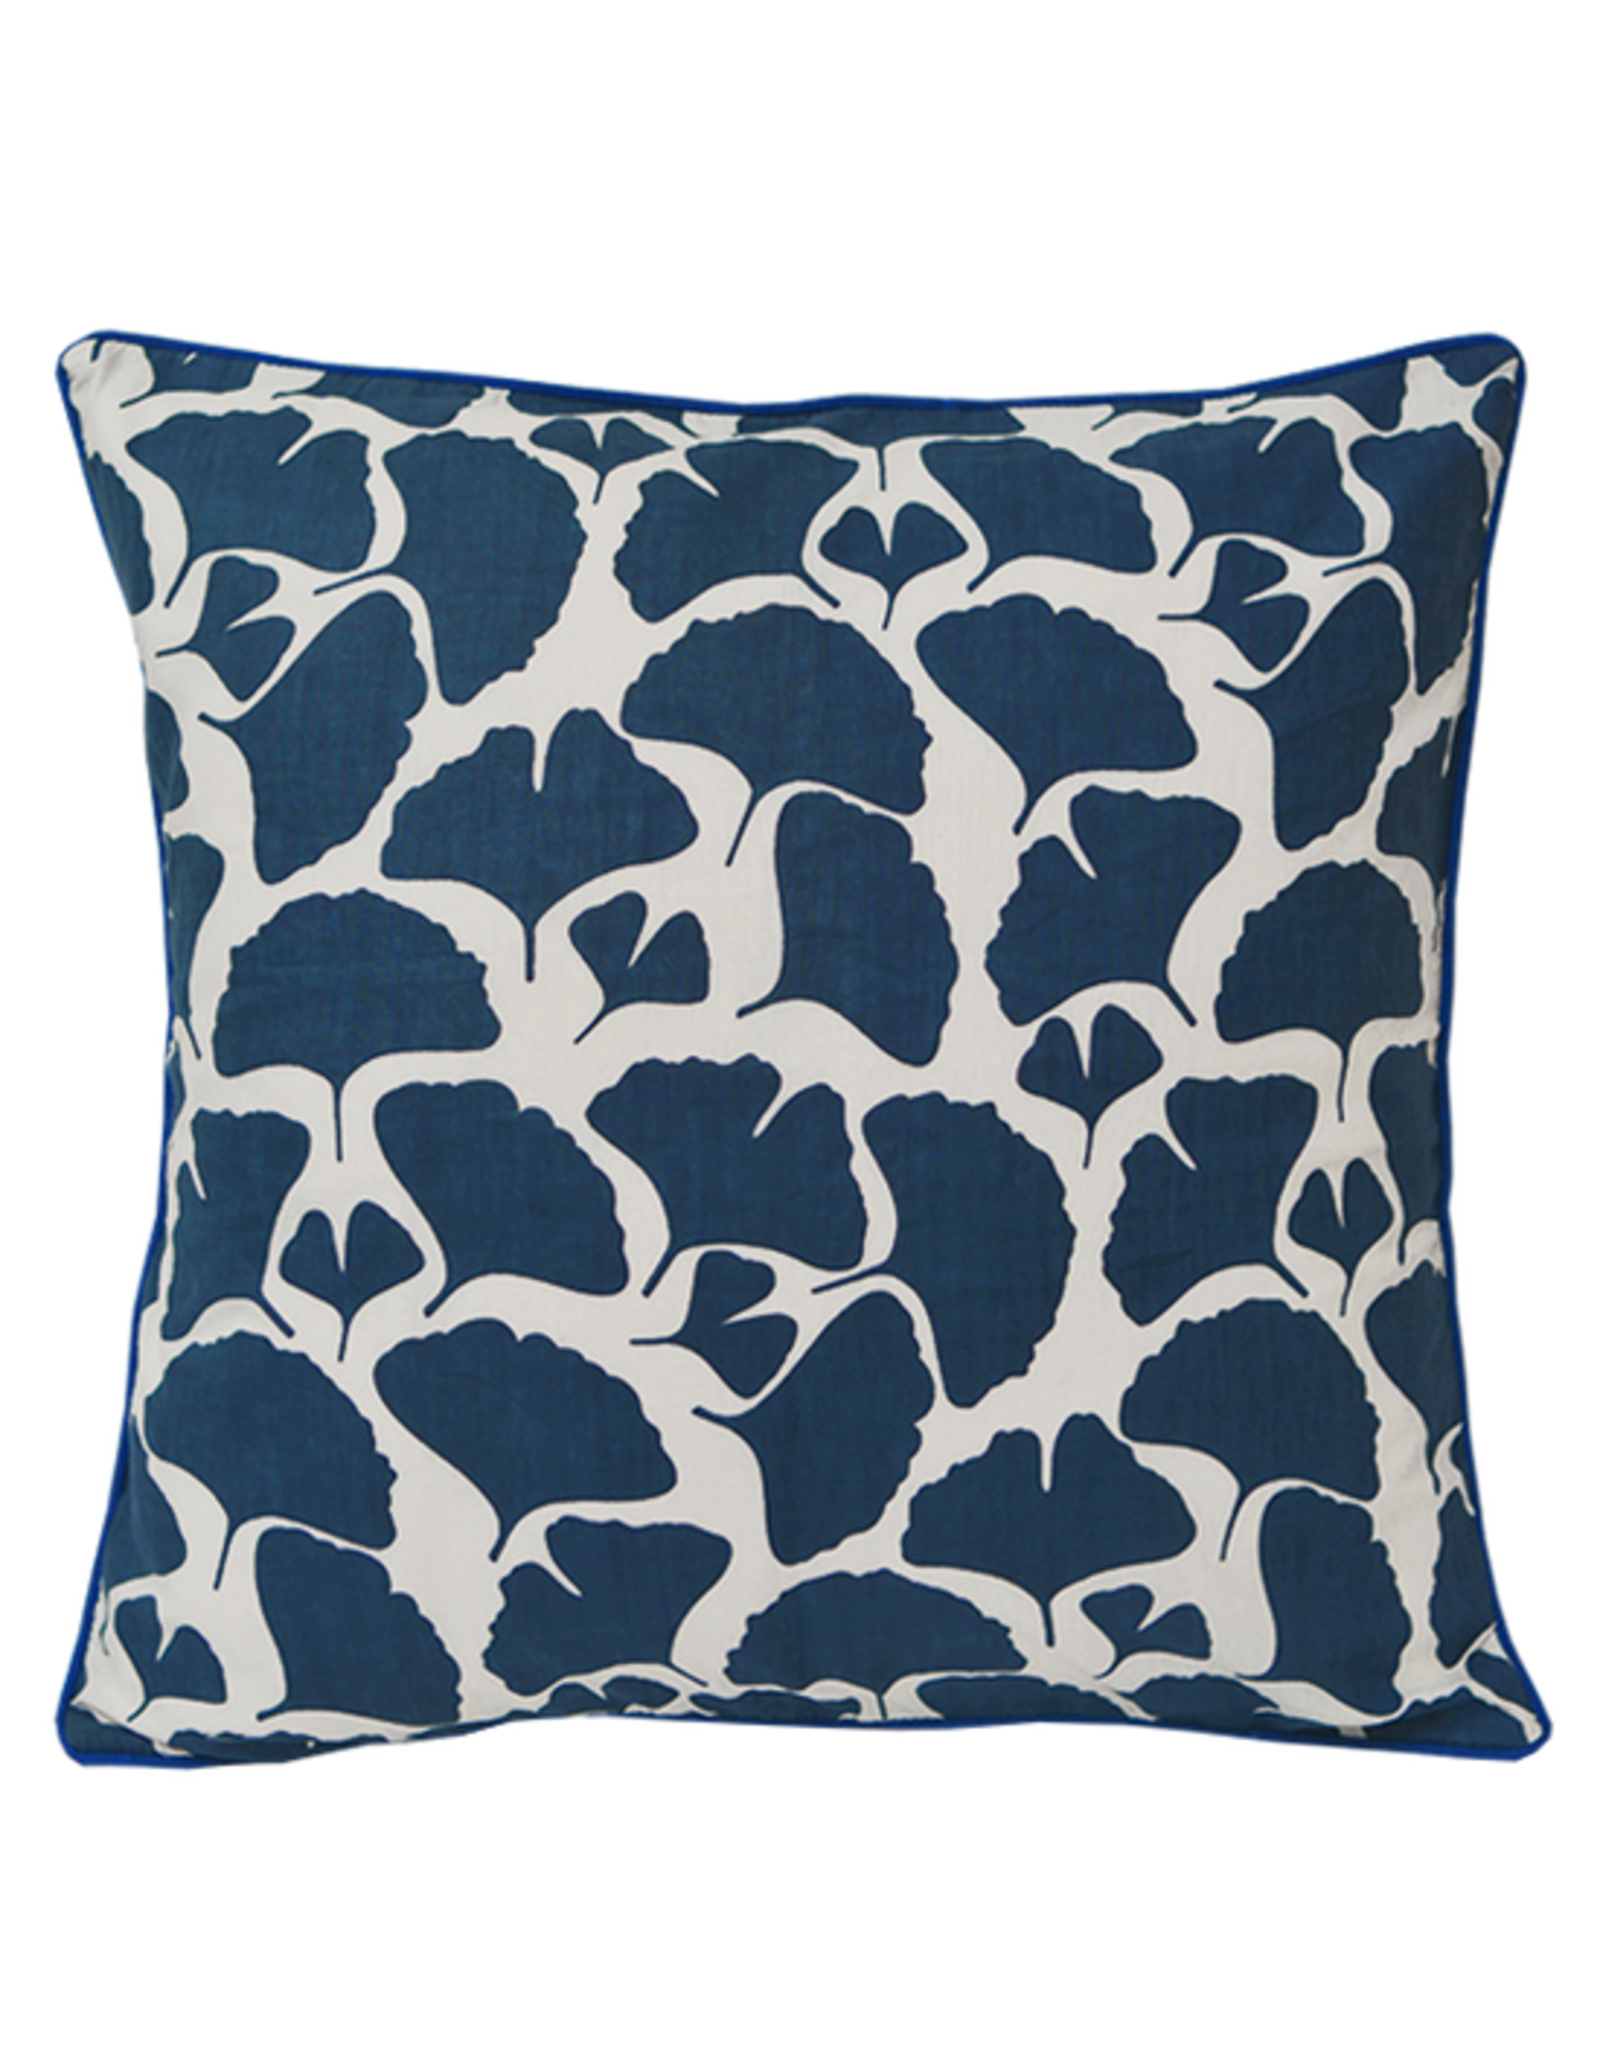 Trade roots Bright Cotton Pillows, 18 x 18